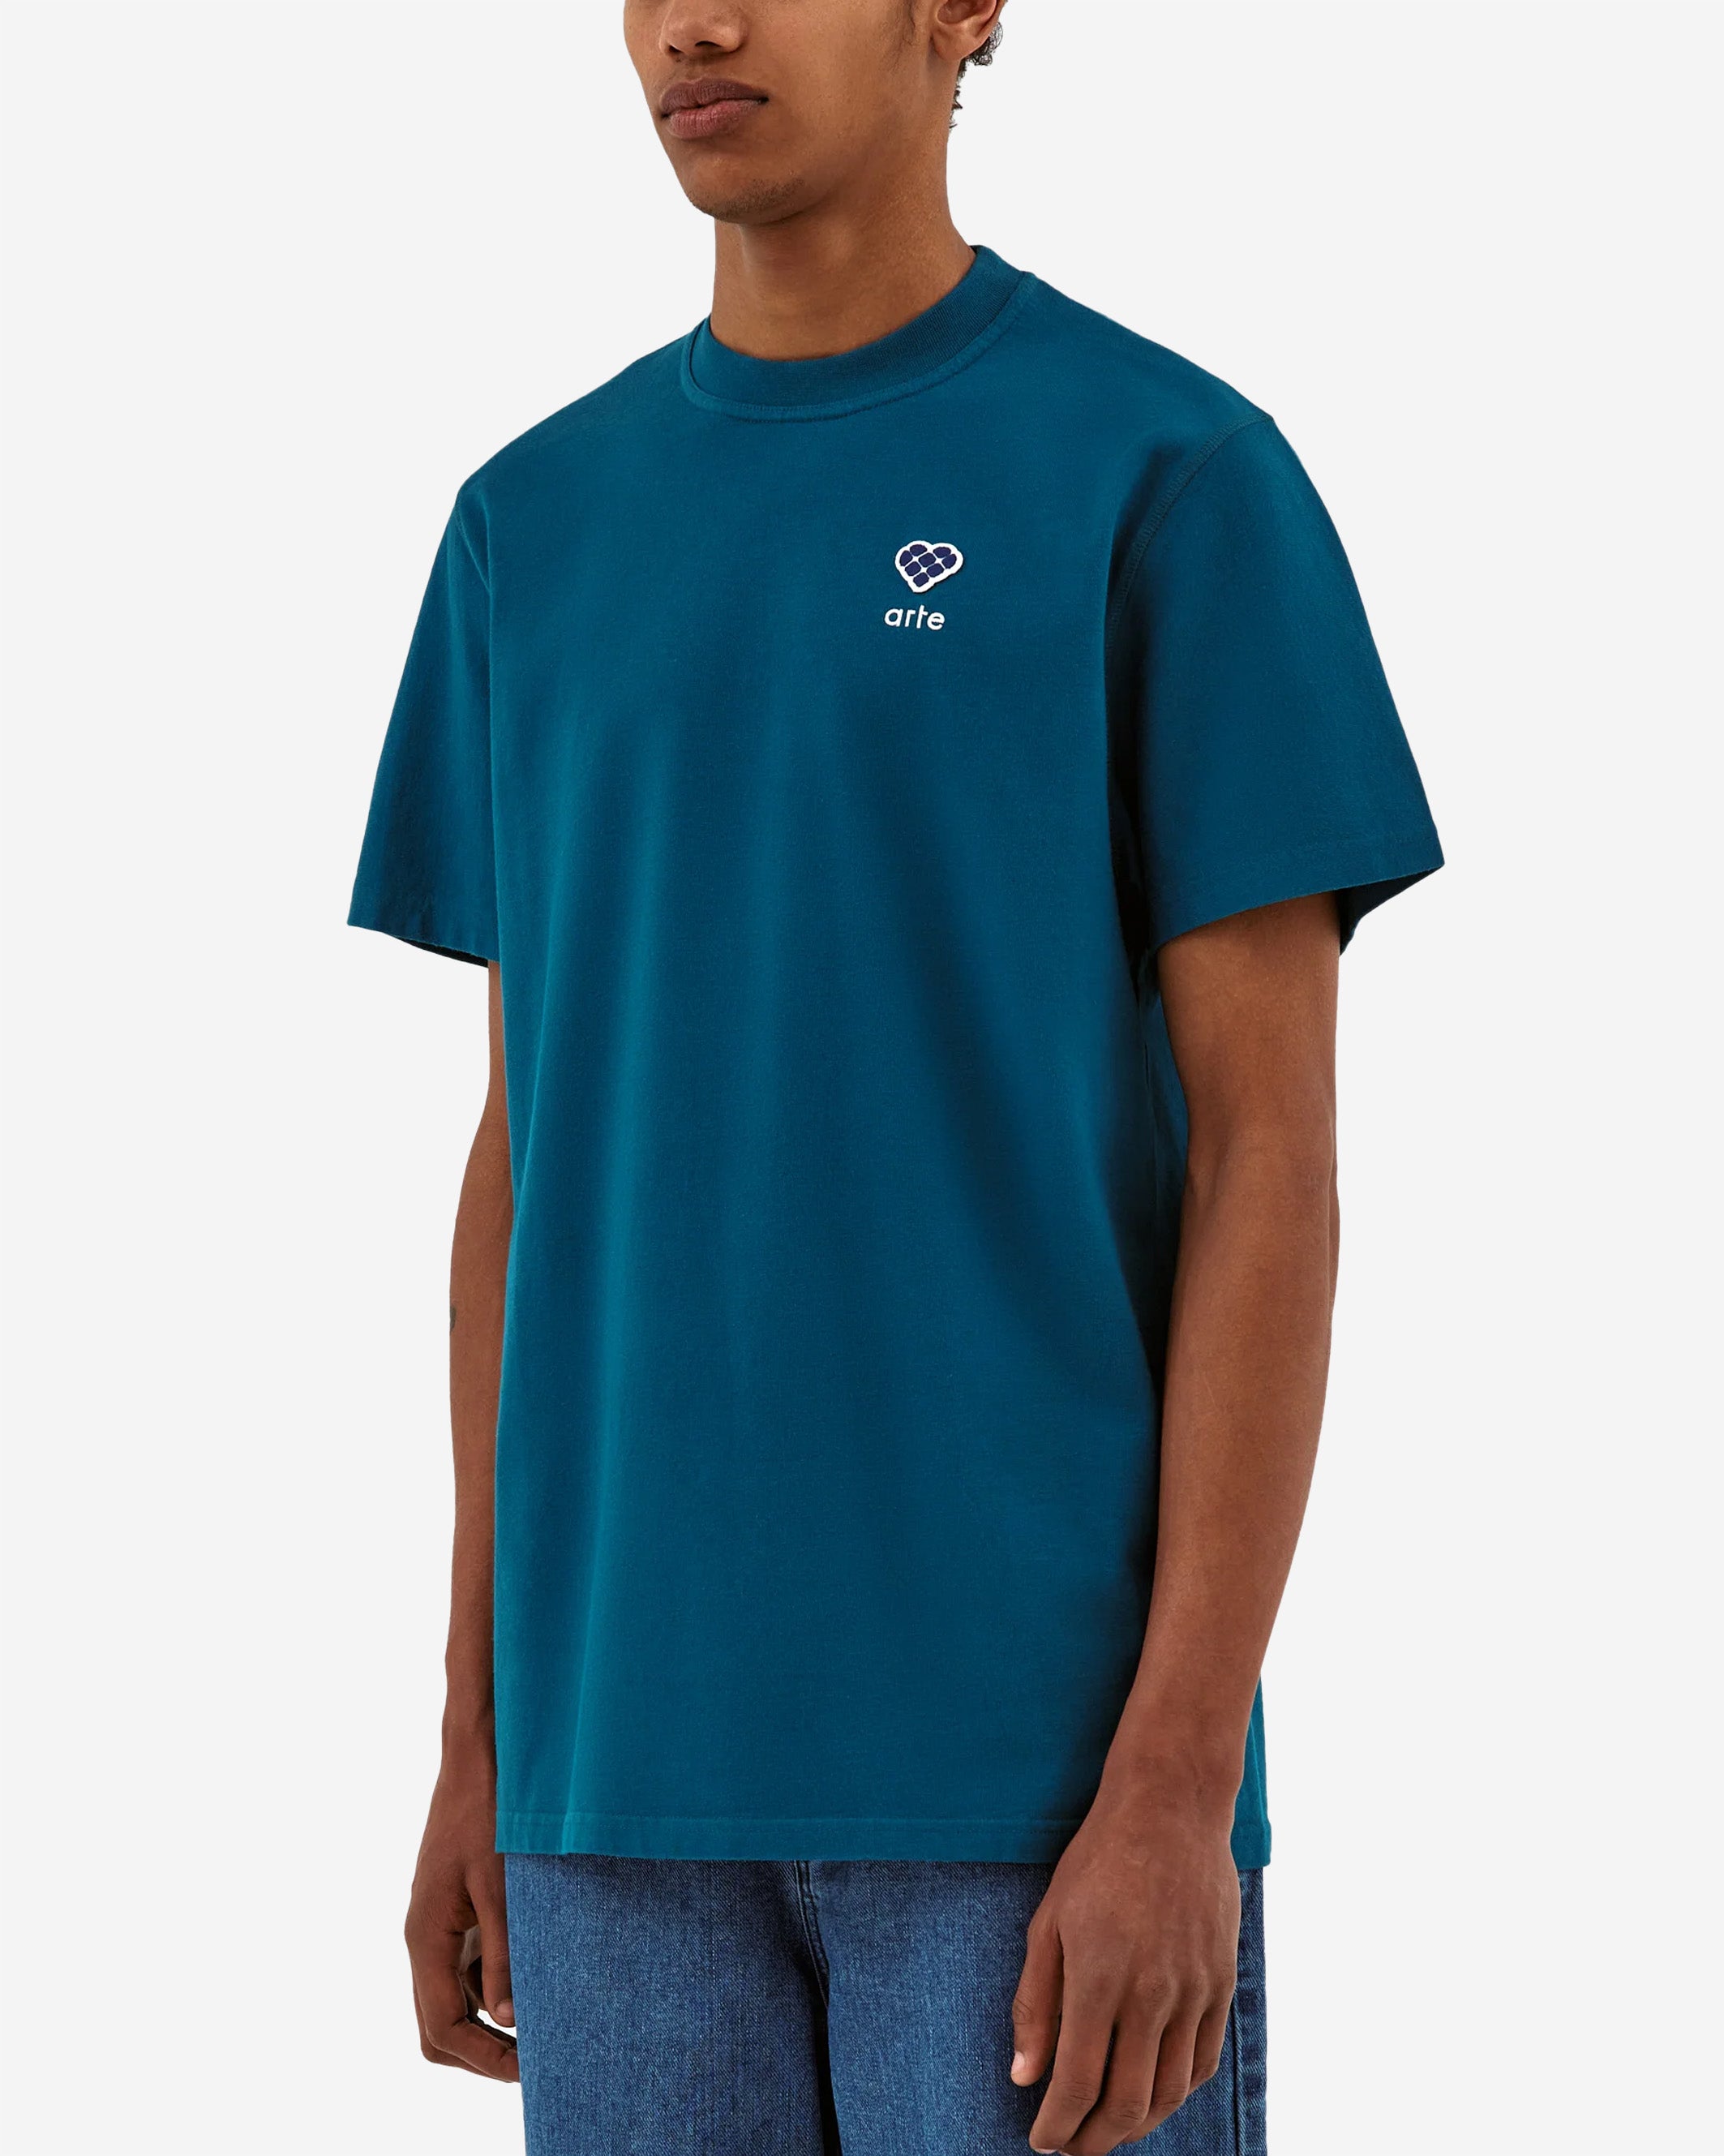 The Tommy Heart Patch T-shirt is a perfect base T-shirt for your wardrobe. The blue T-shirt is made out of premium cotton, cut in a relaxed regular fit and has a slightly higher neck. On the left chest a seasonal Arte logo patch with a white embroidery below.